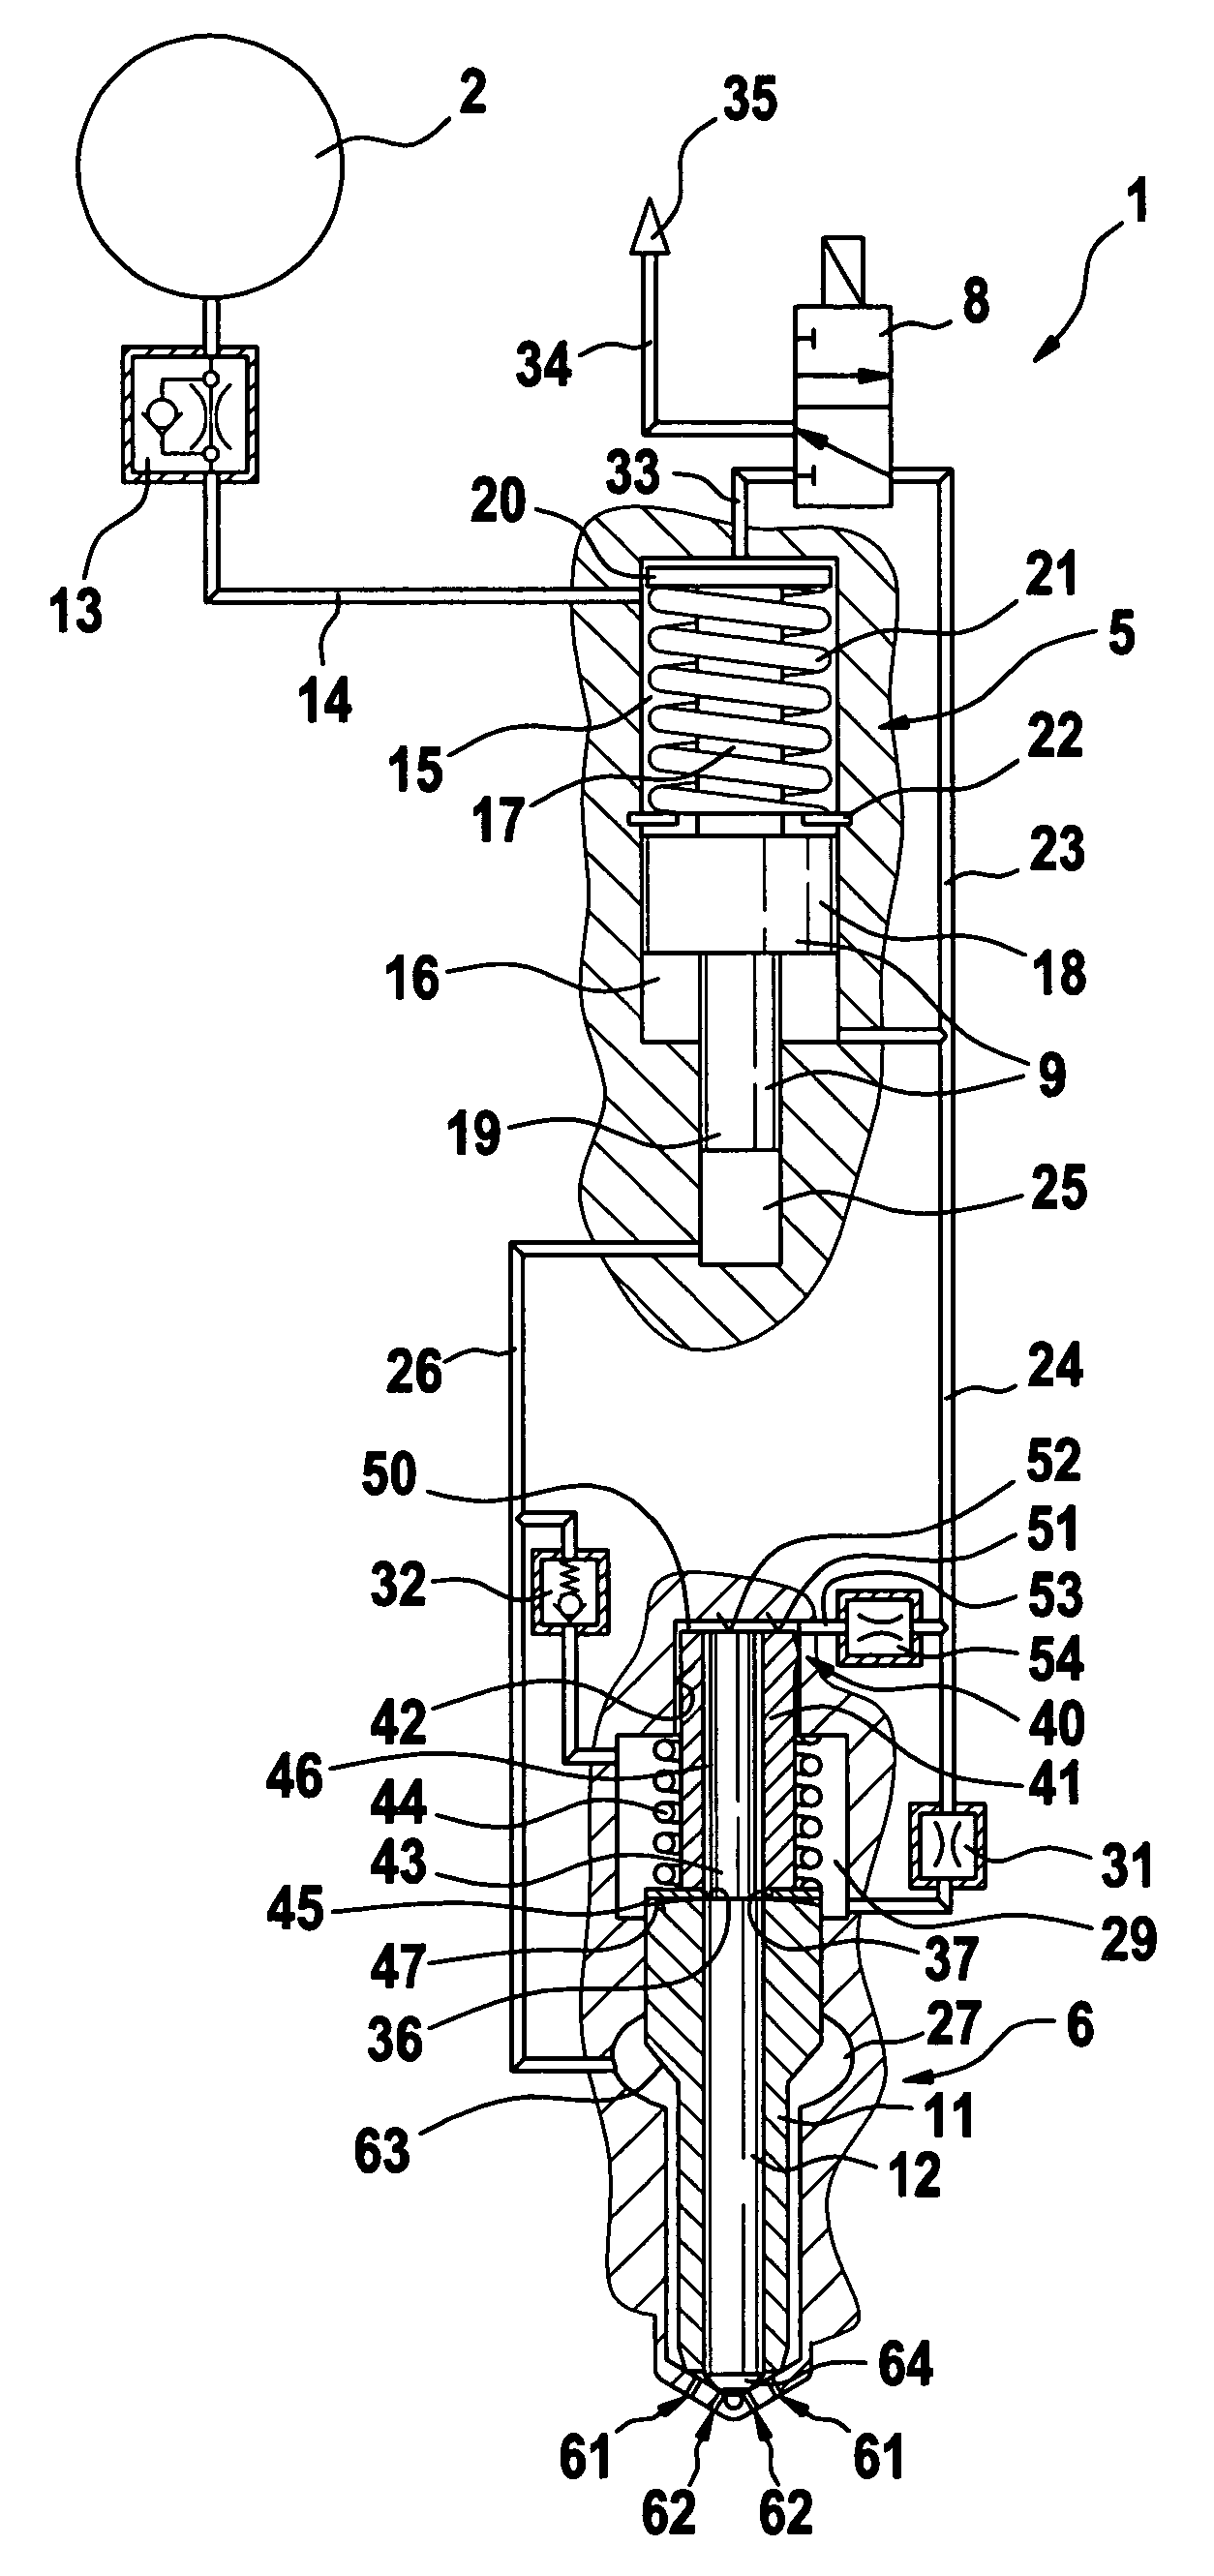 Fuel injection system for internal combustion engines with needle stroke damping